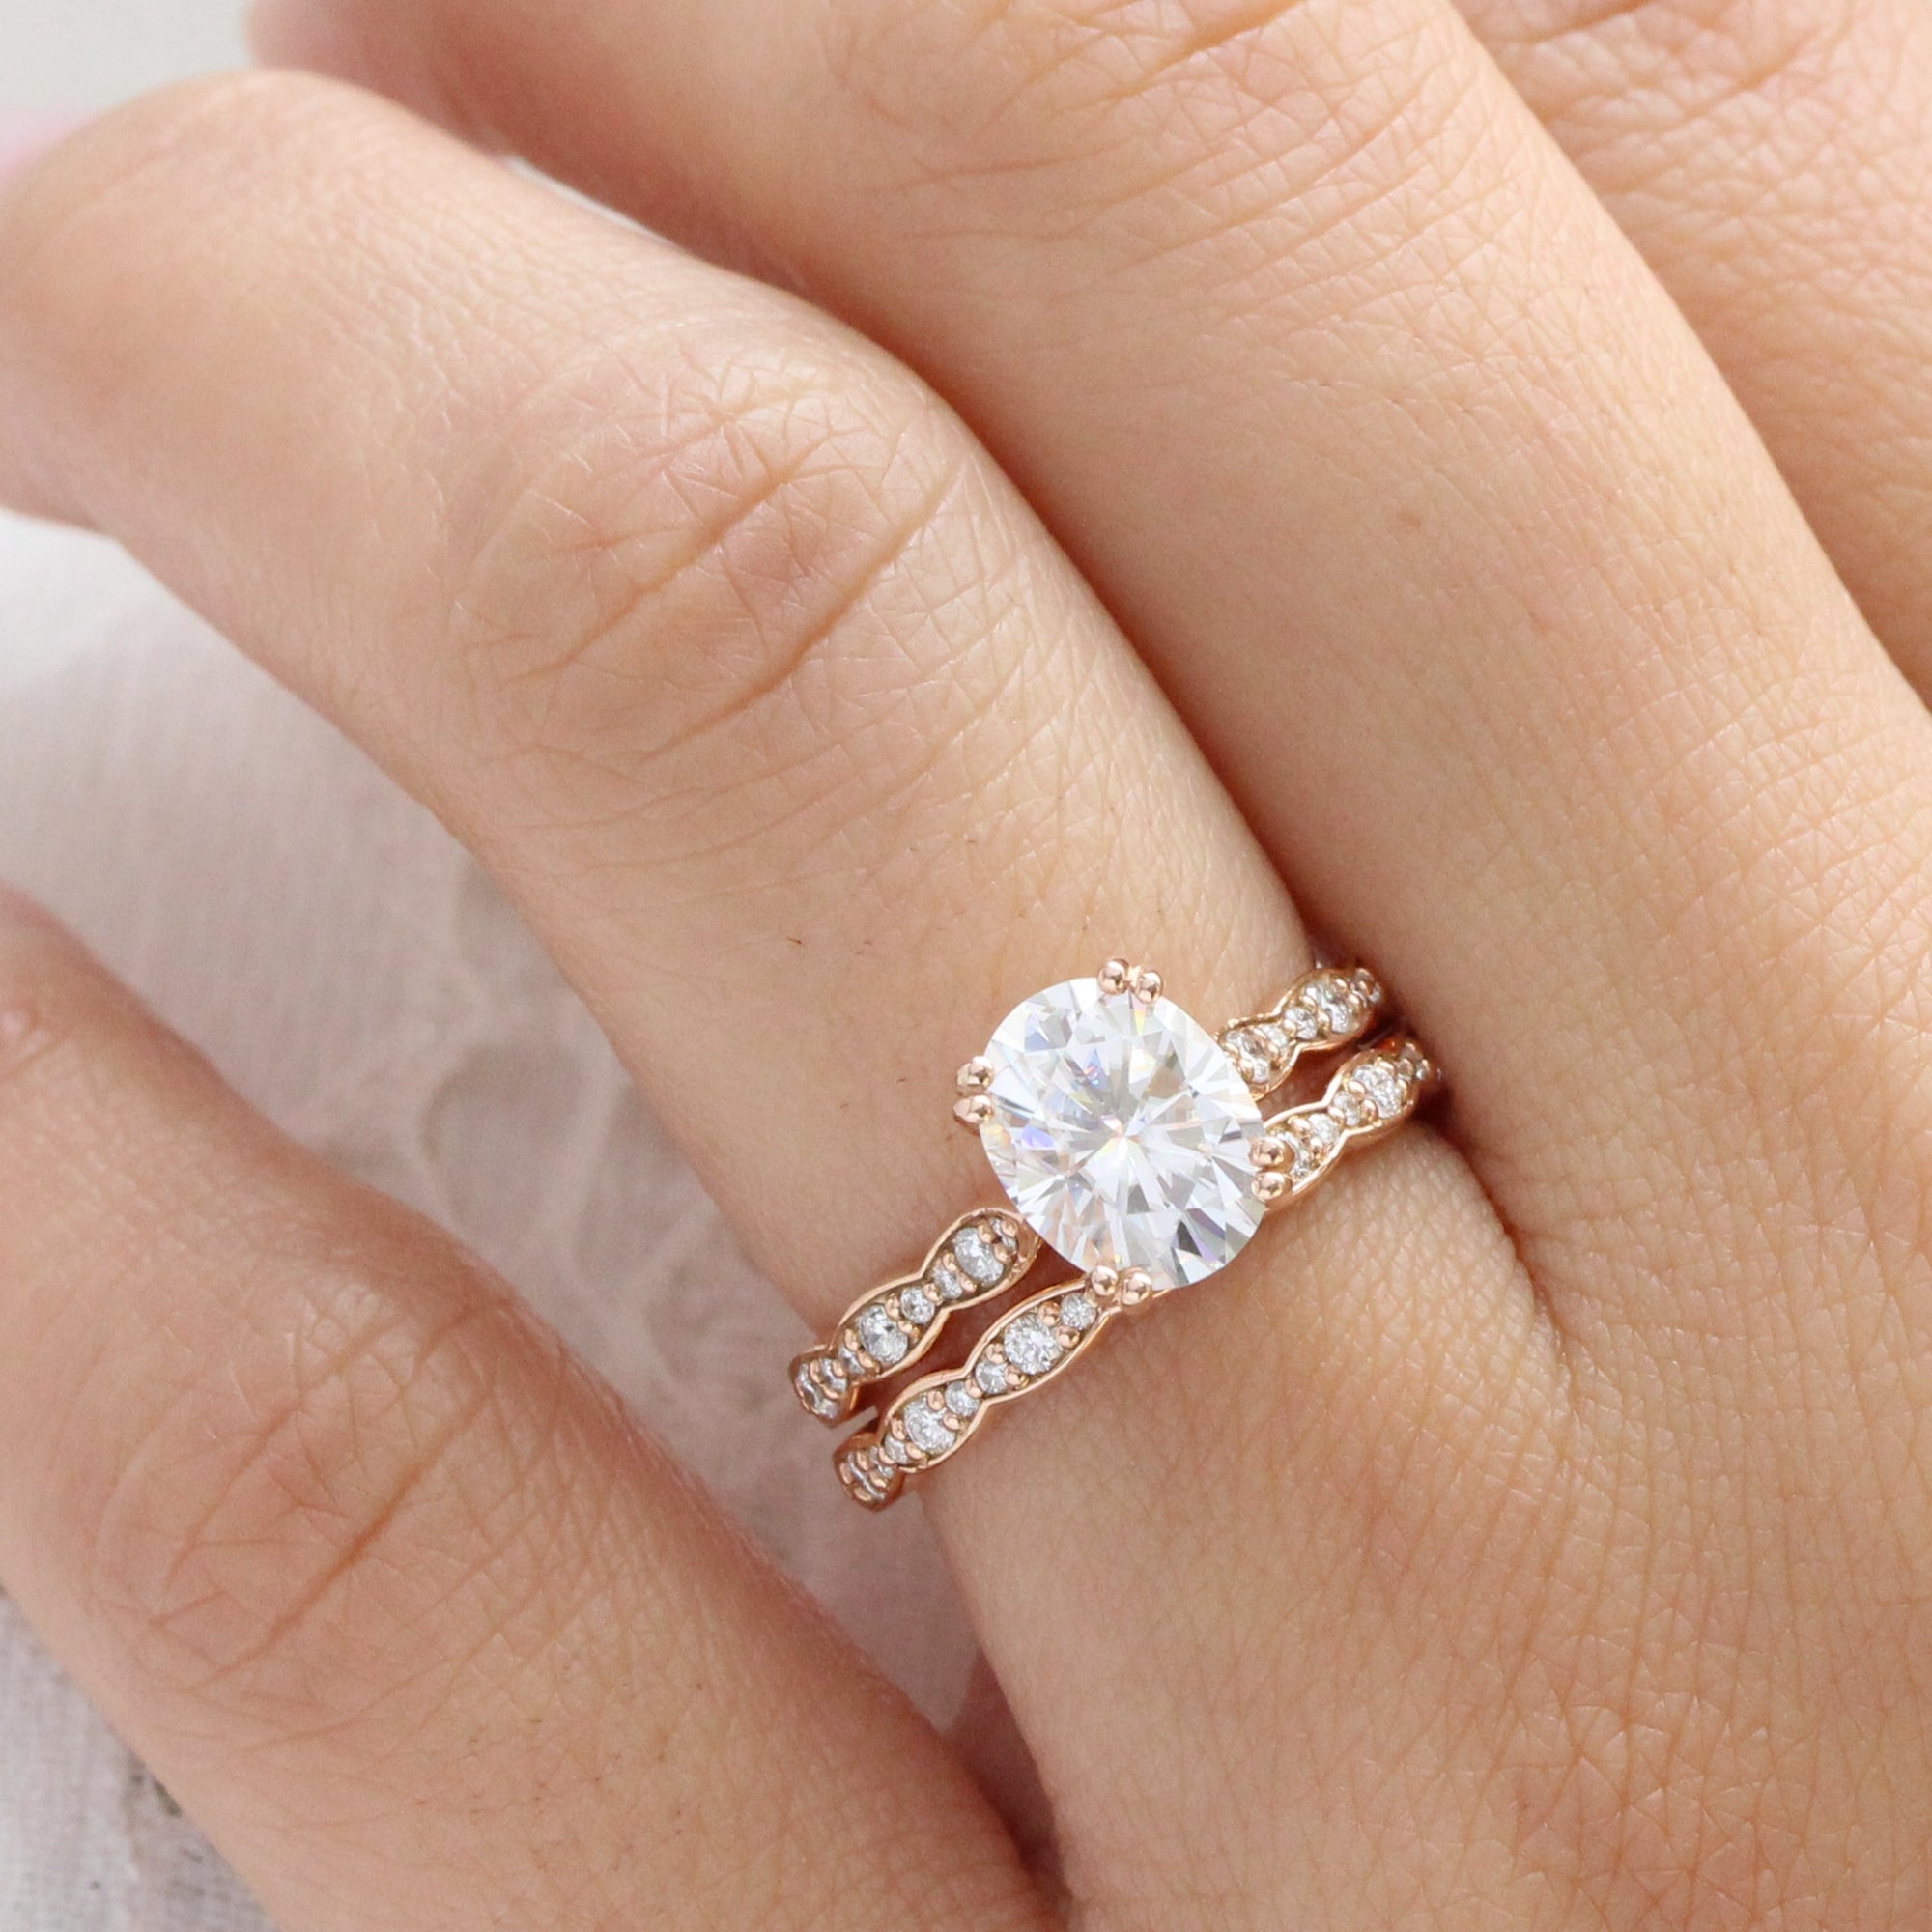 Moissanite diamond ring rose gold oval solitaire engagement ring la more design jewelry